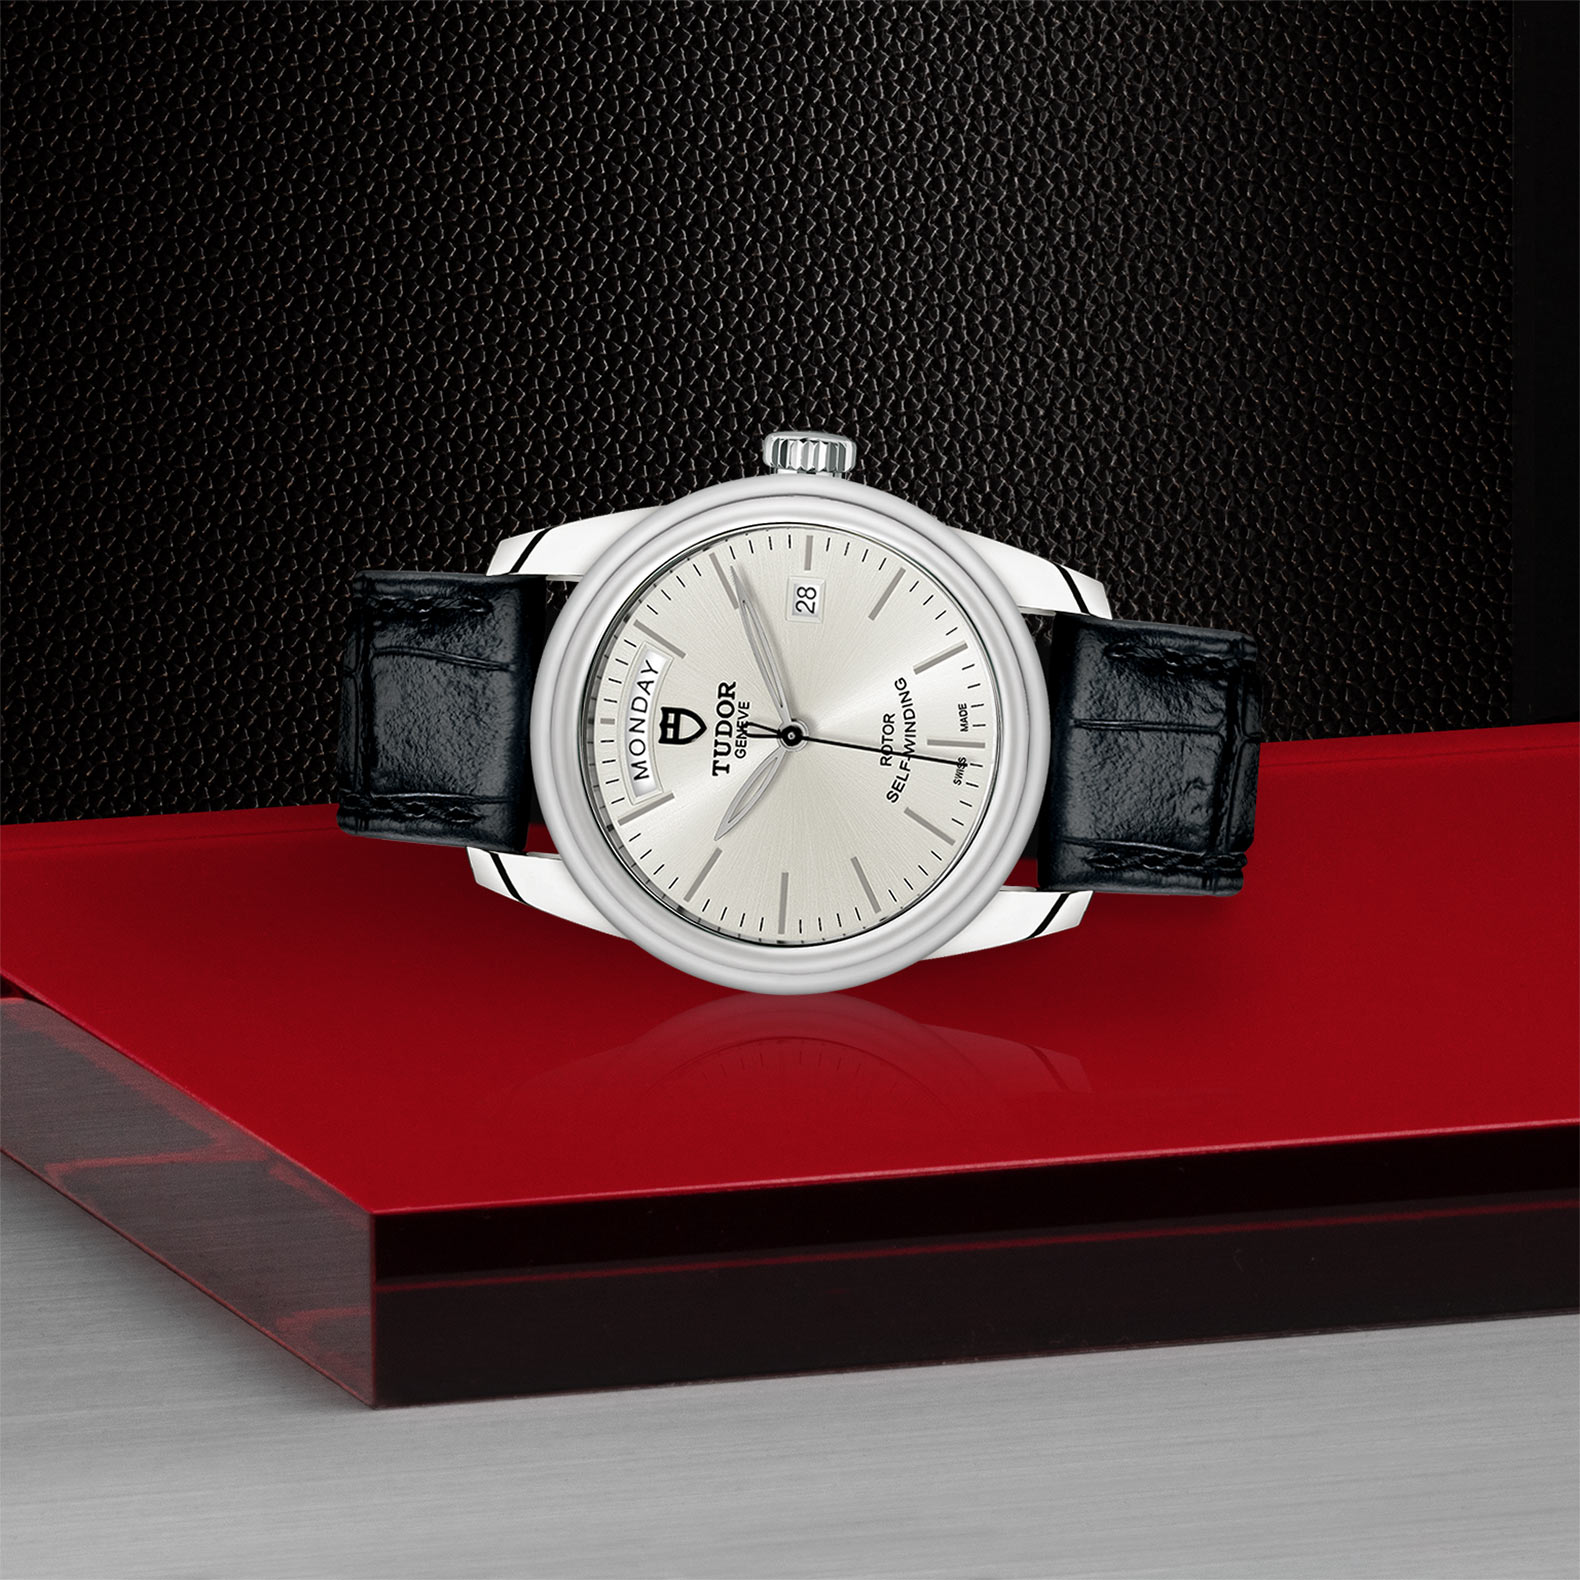 Tudor Glamour Date+Day M56000-0018